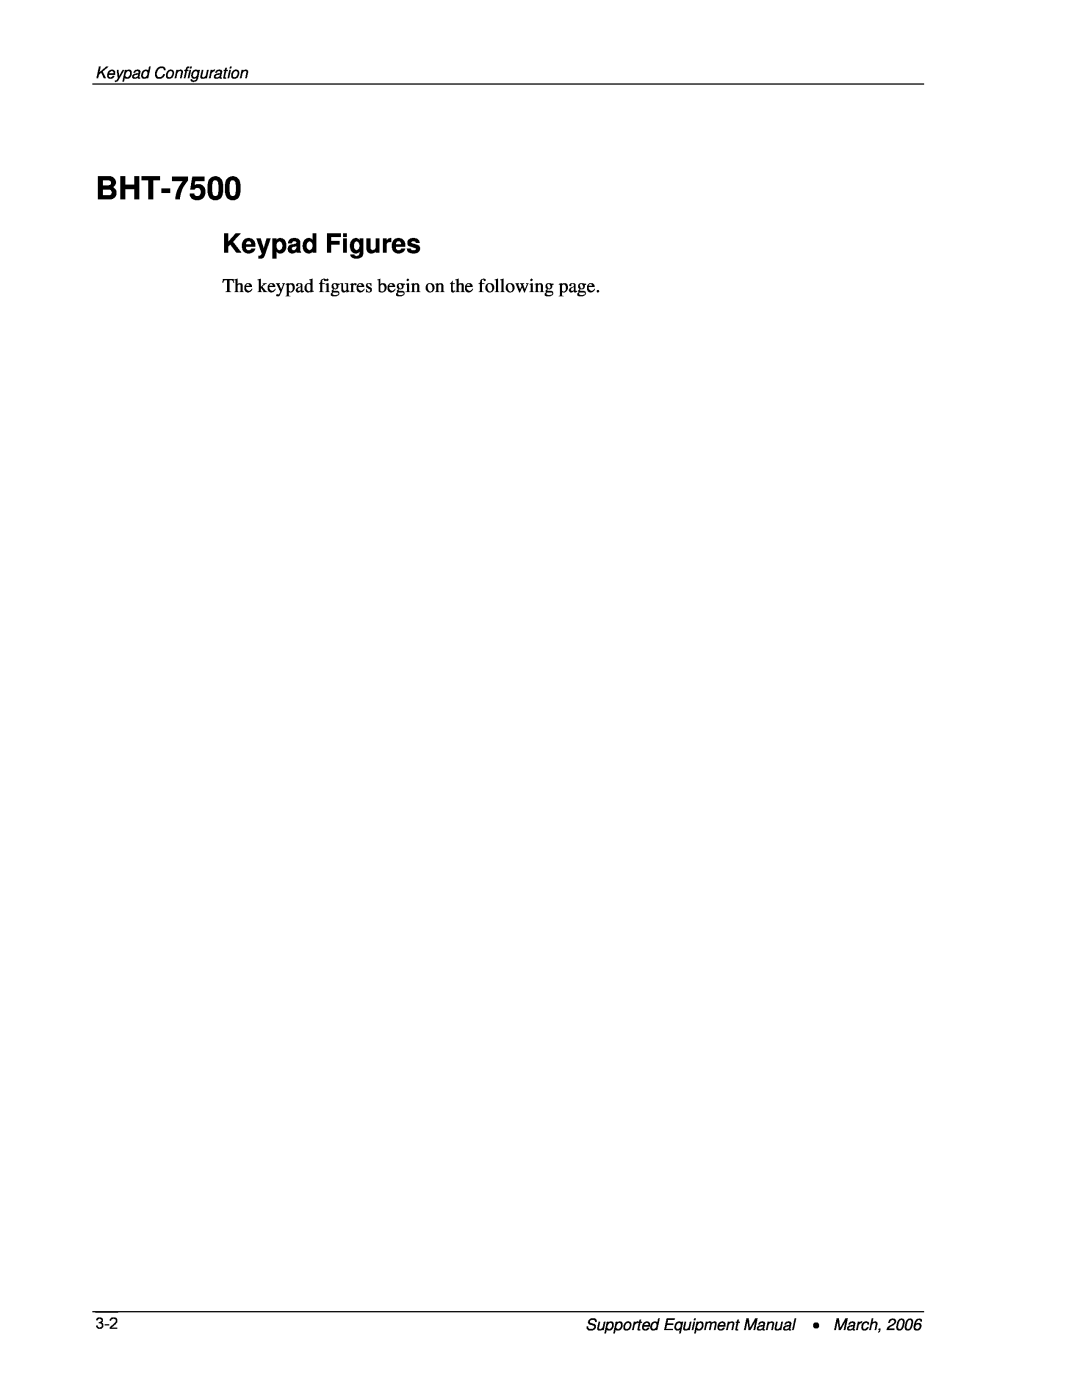 Denso BHT-7500, BHT-103 manual Keypad Figures, Keypad Configuration, Supported Equipment Manual March 